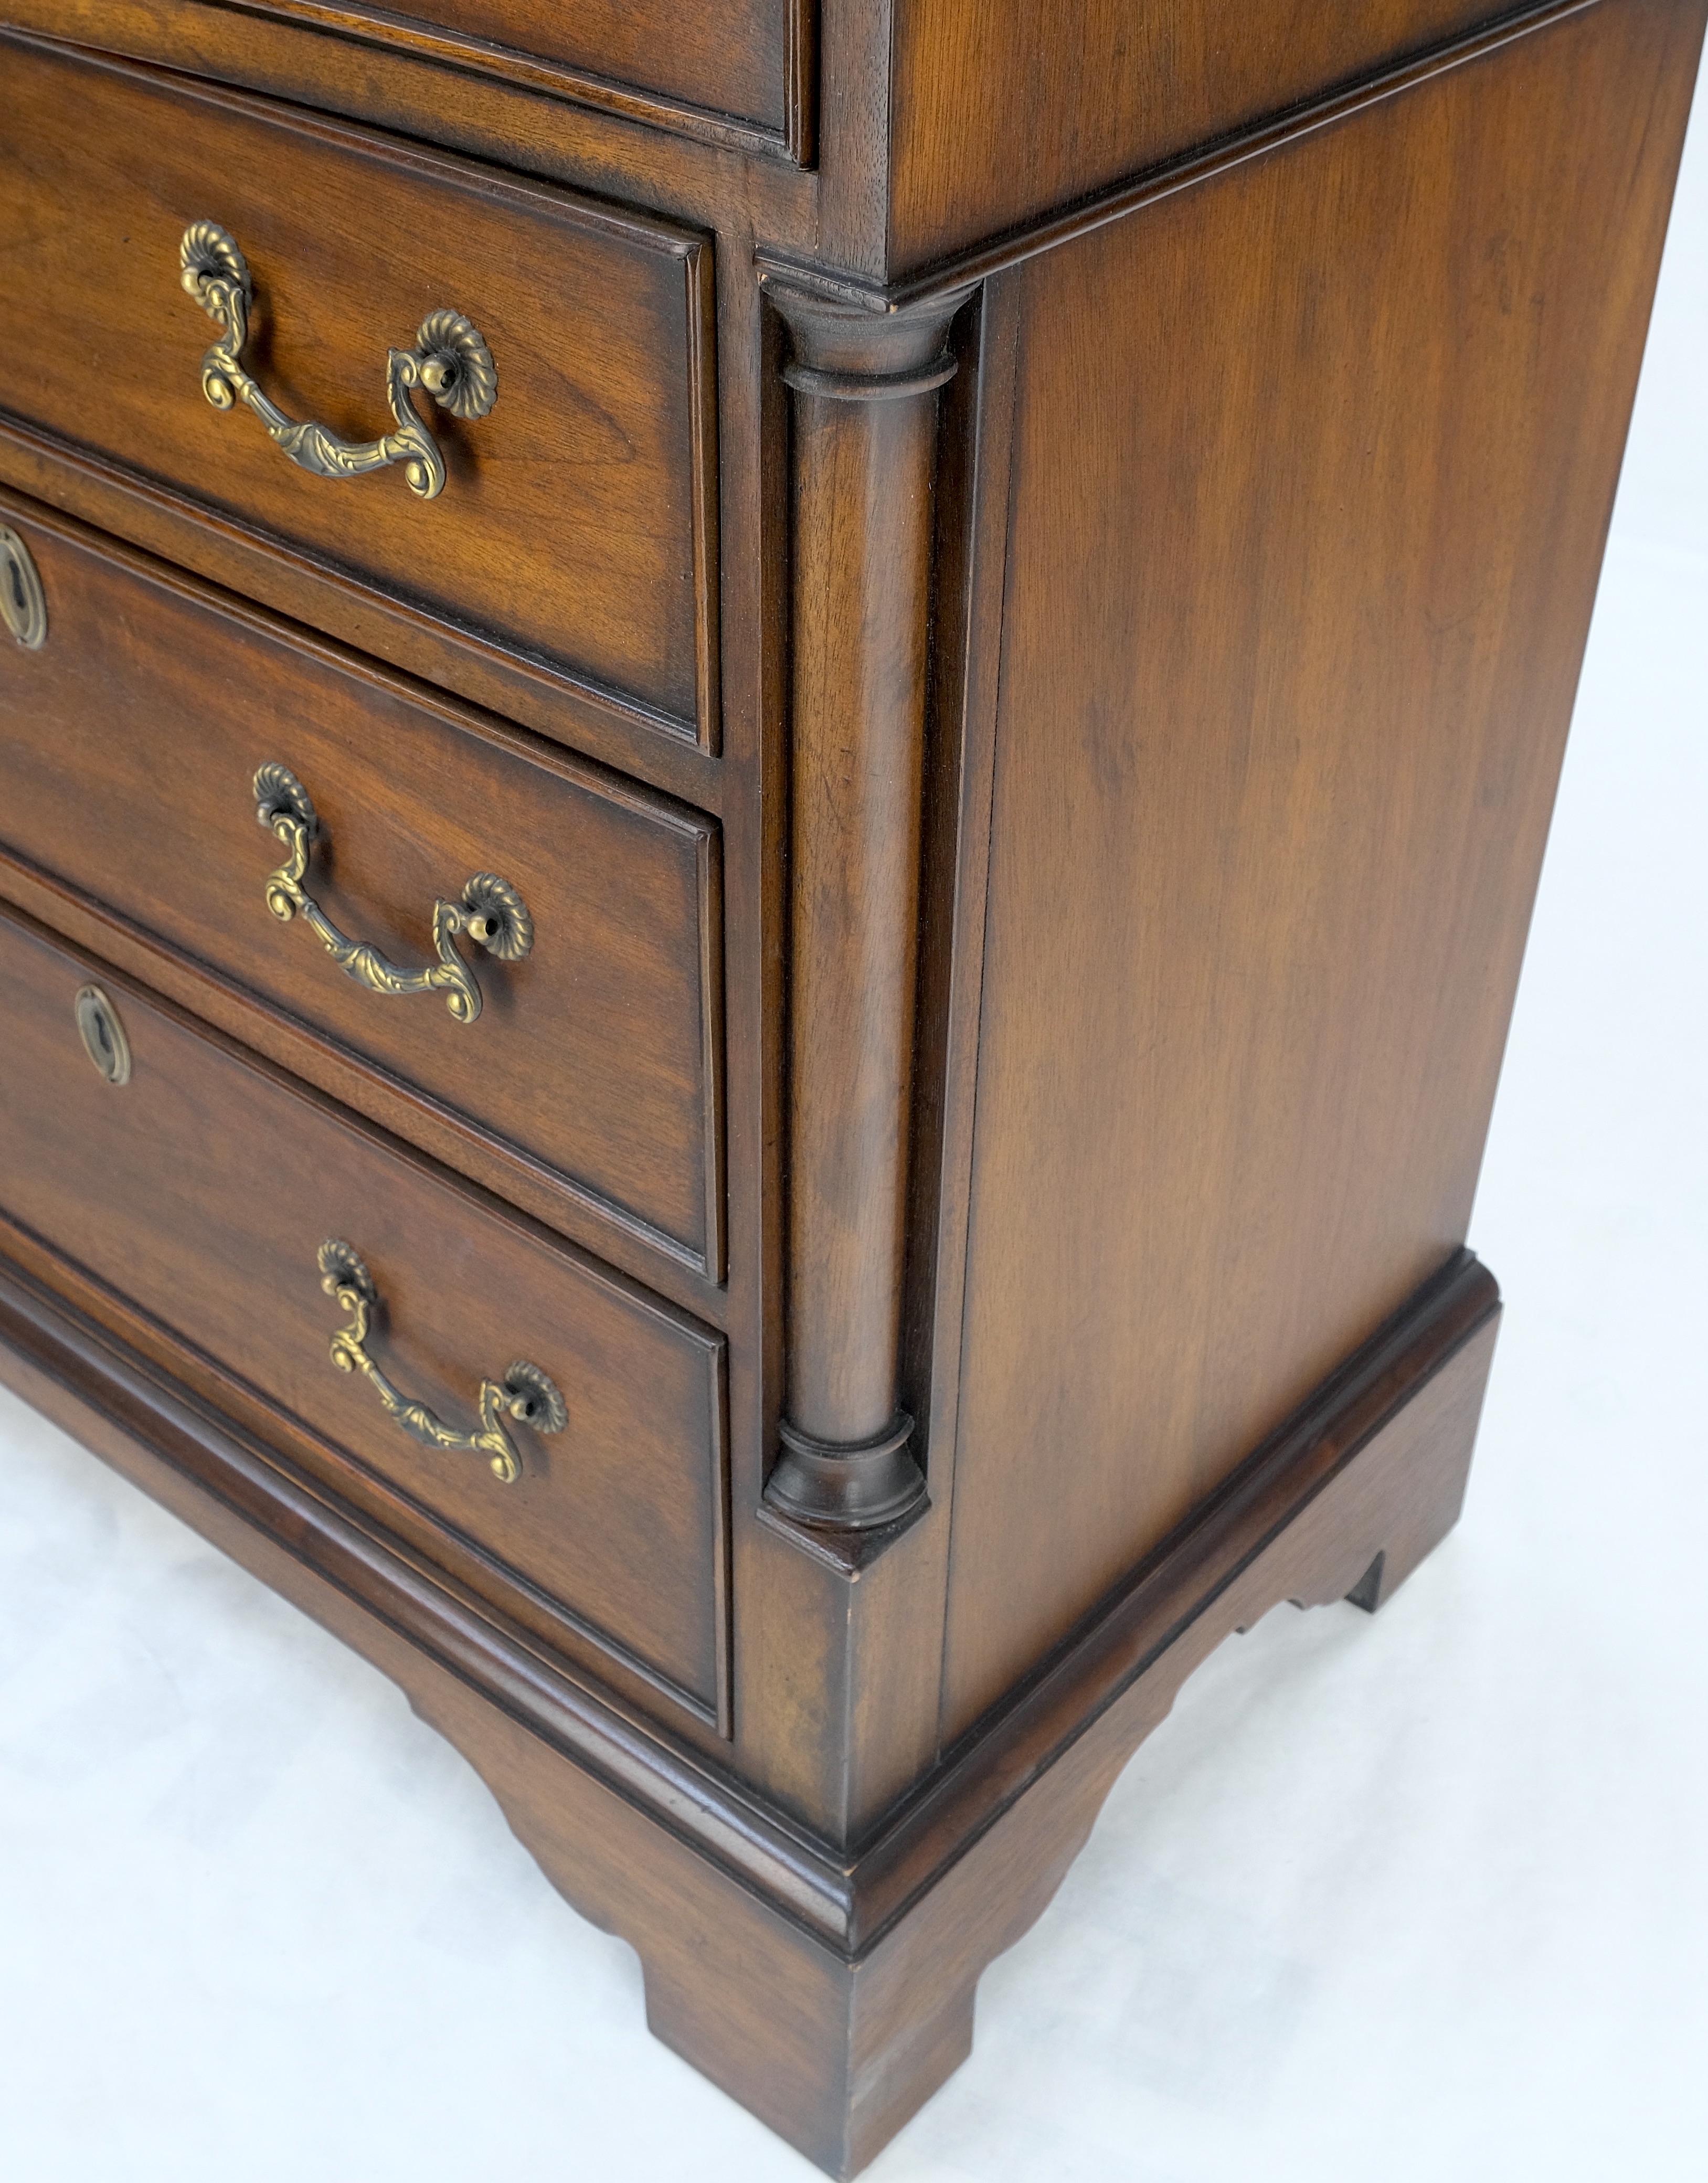 Banded Top Mahogany Inlayed Bracket Feet 11 Drawers Dresser Credenza MINT! In Good Condition For Sale In Rockaway, NJ